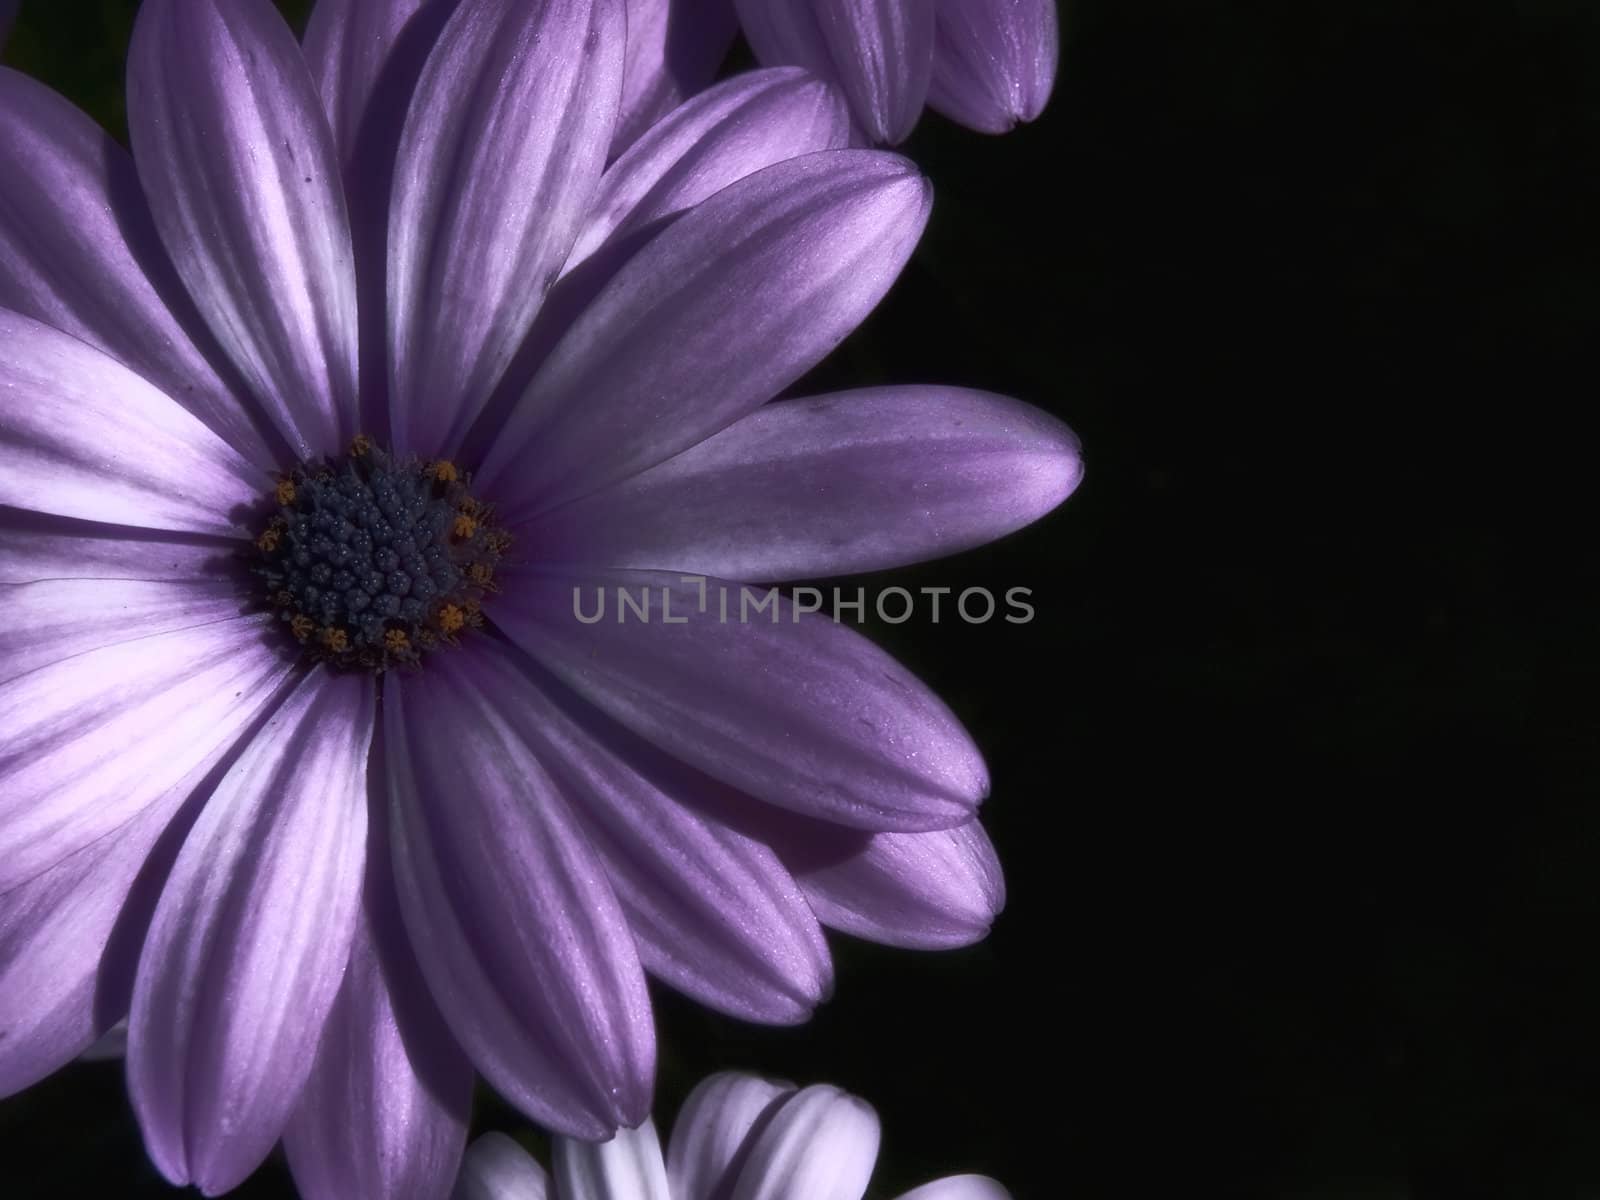 Purple flower on a black background processed as an HDR photo.